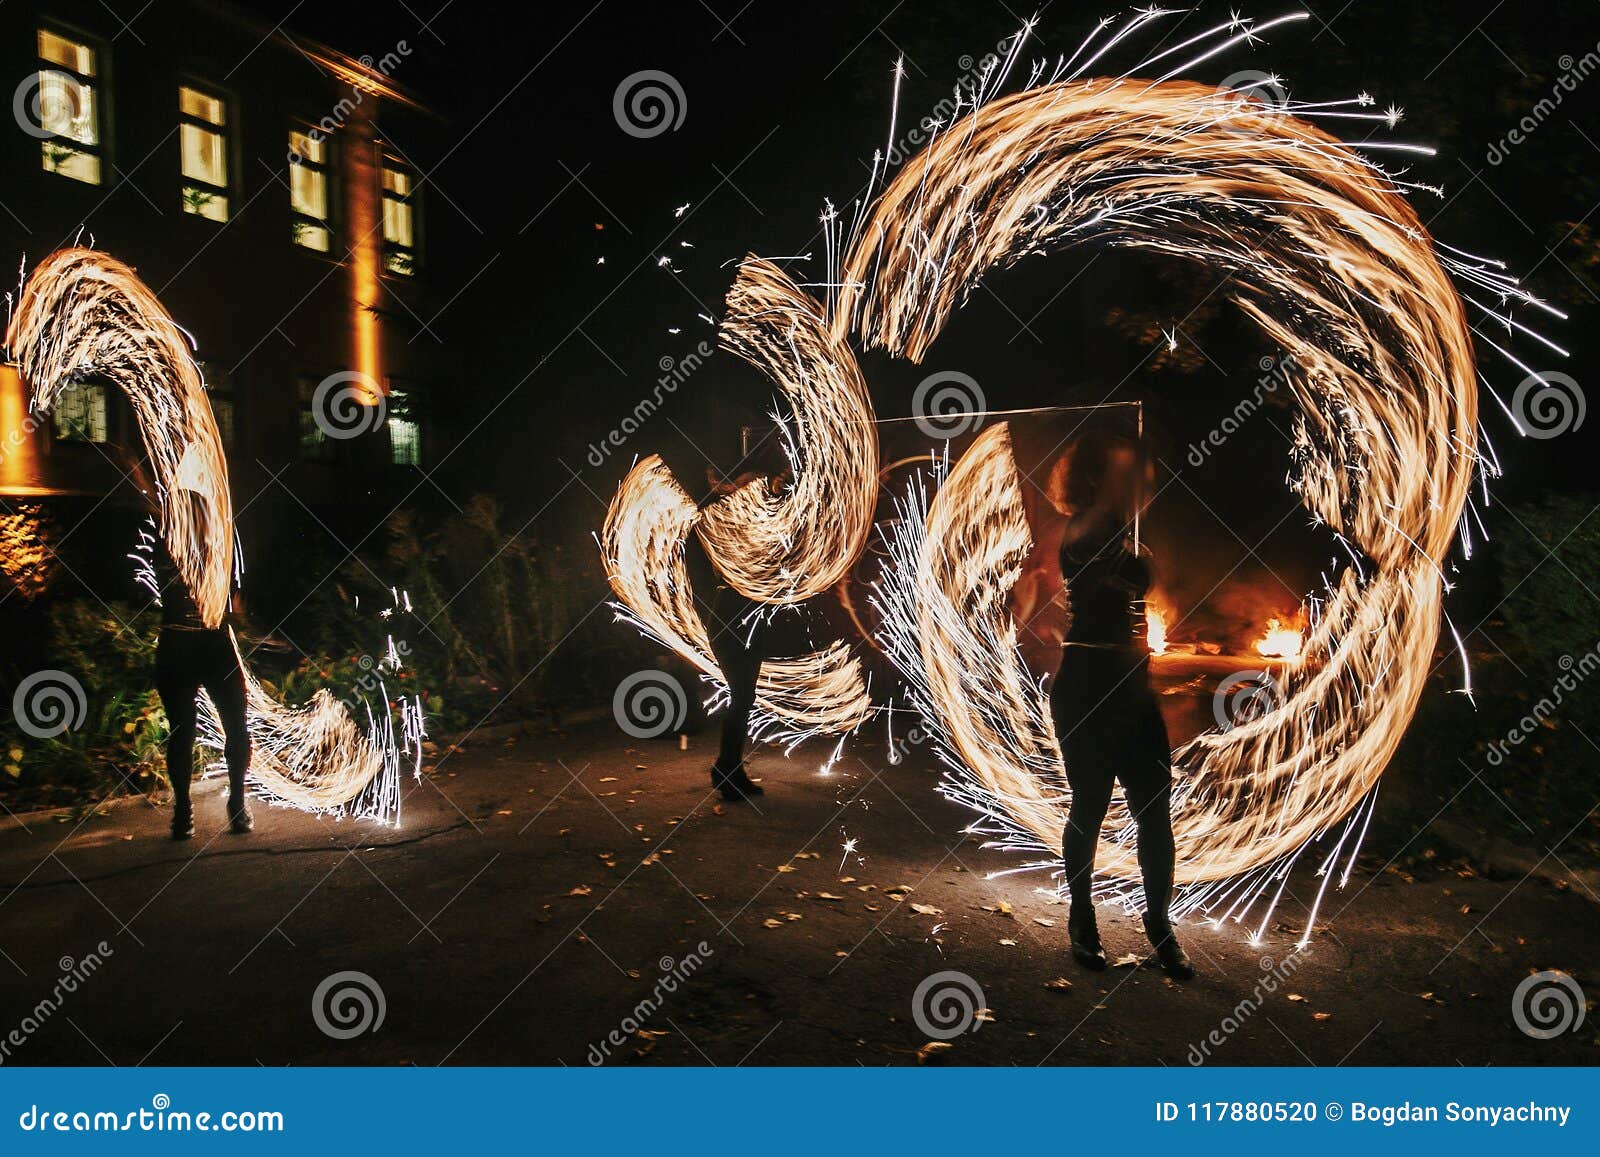 amazing fire show at night at festival or wedding party. fire da